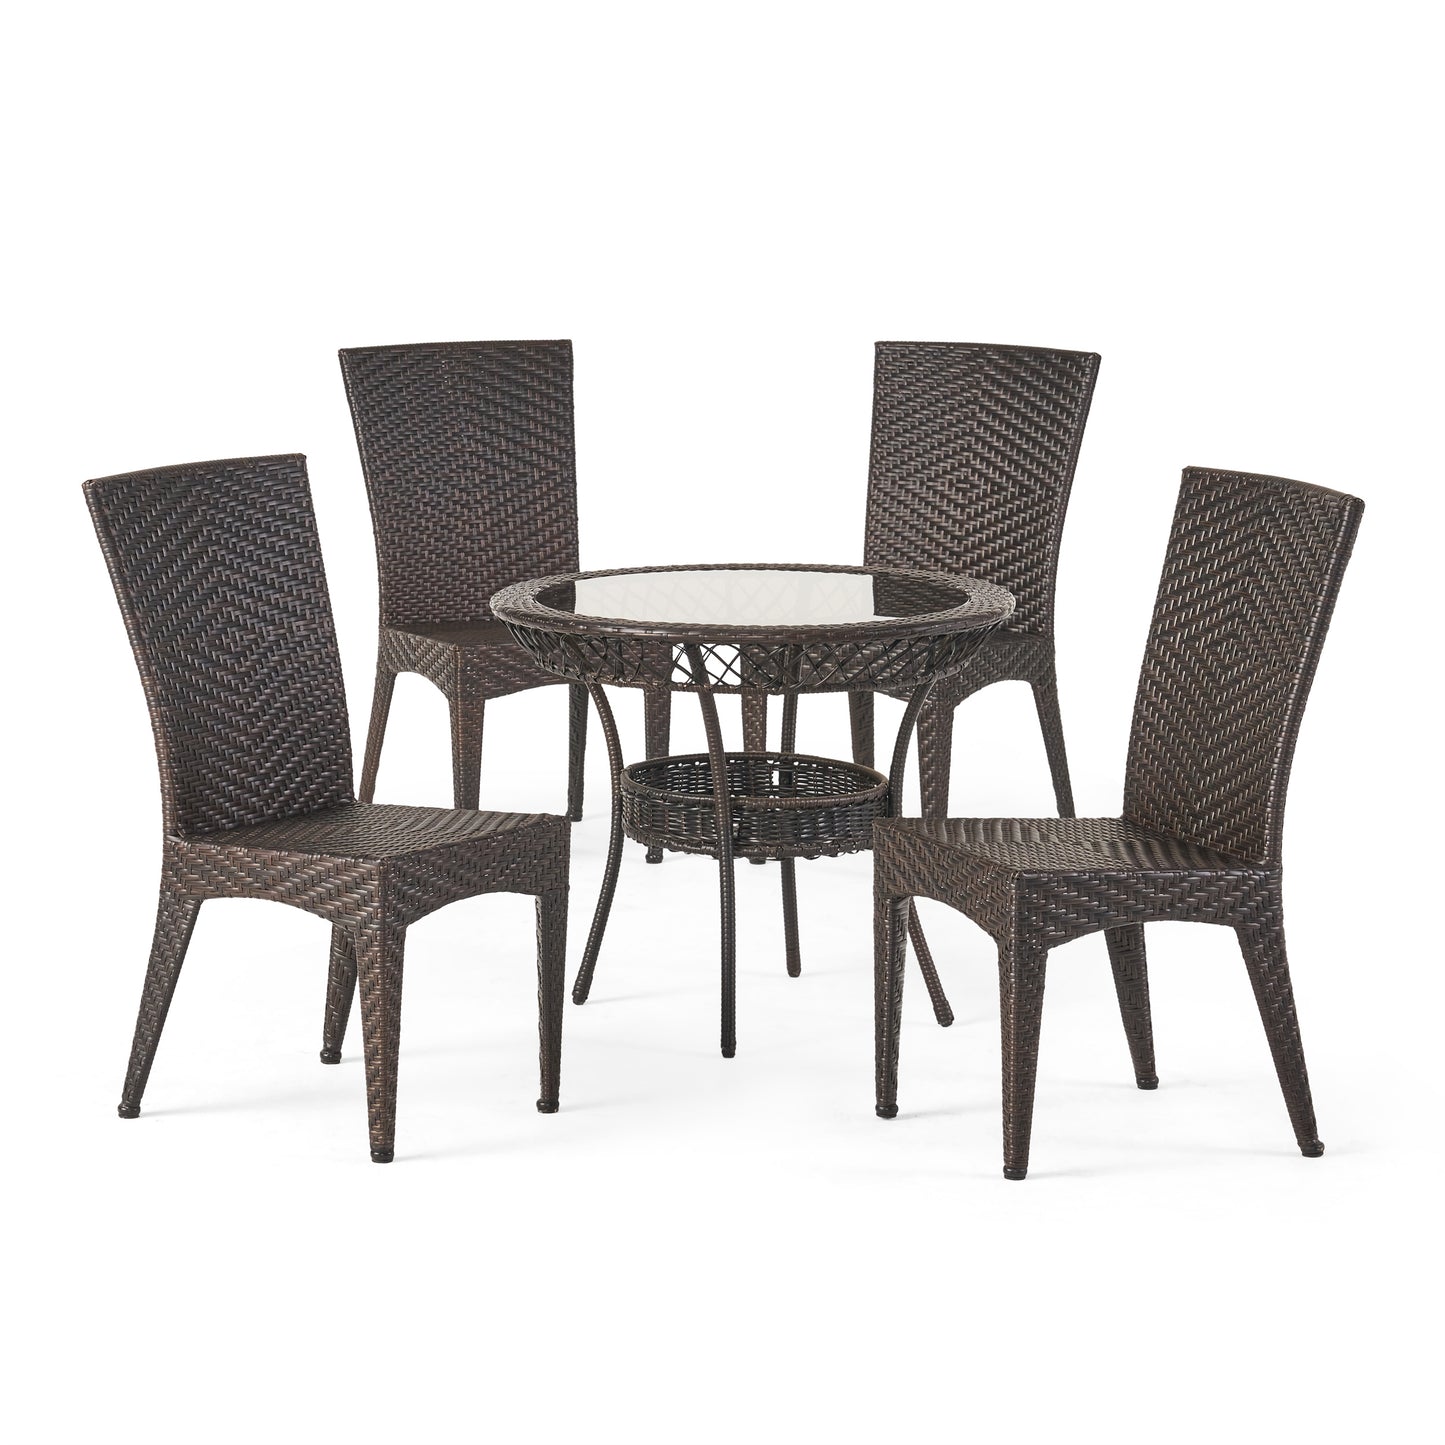 Solana Outdoor Multibrown Wicker 5pc Dining Set